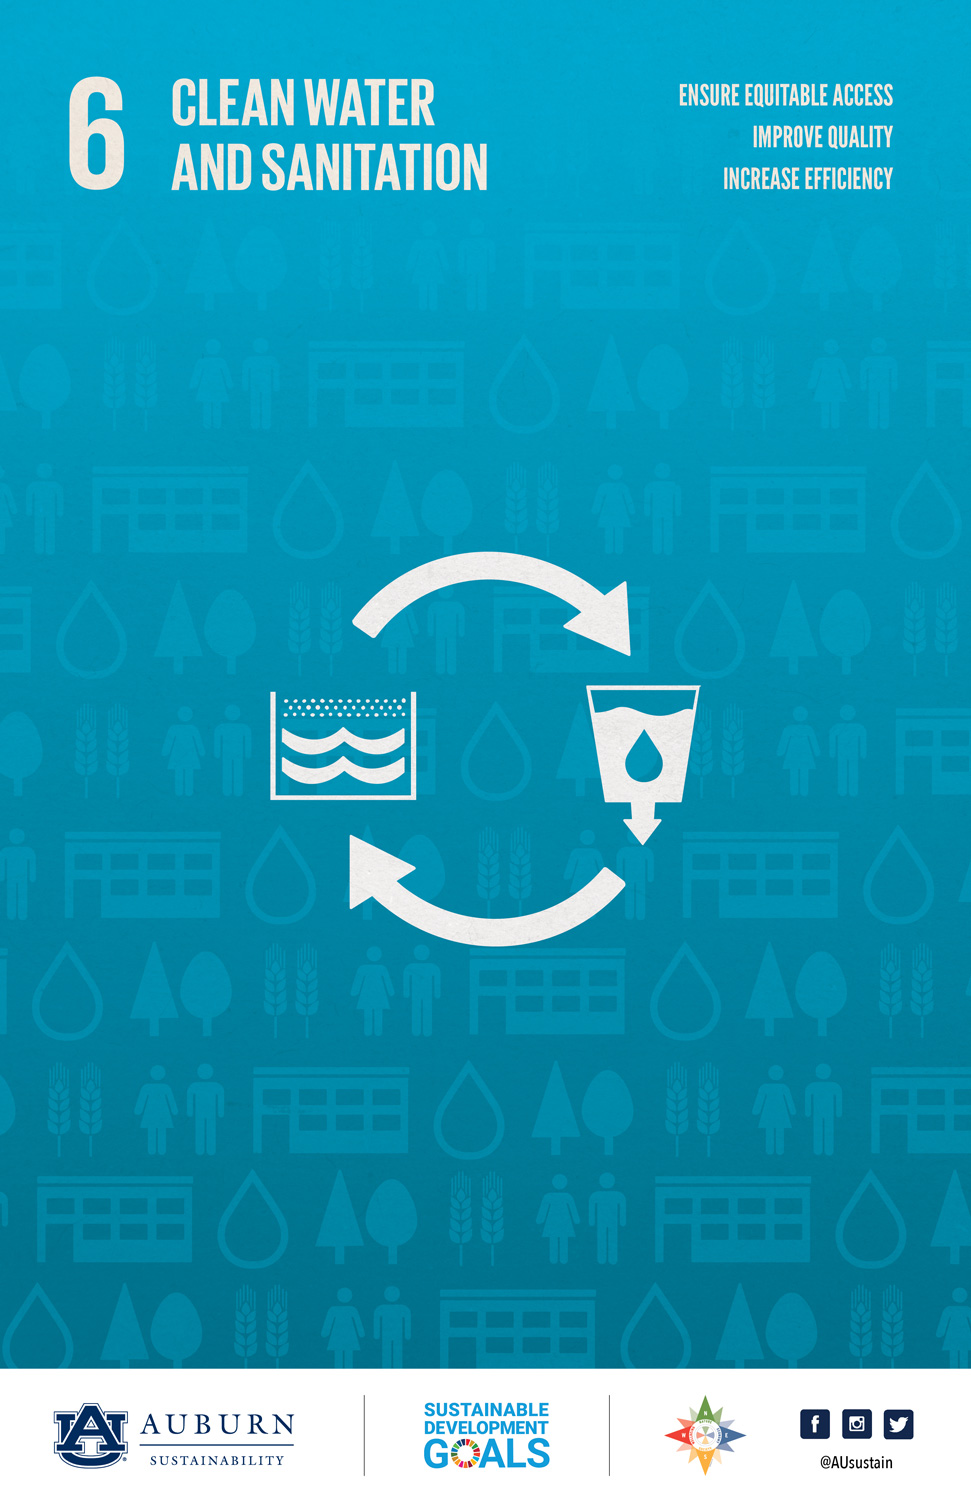 Sustainable Development Goal 6 Poster illustration: Clean Water and Sanitation. Goals include: Ensure equitable access, improve quality, and increase efficiency.